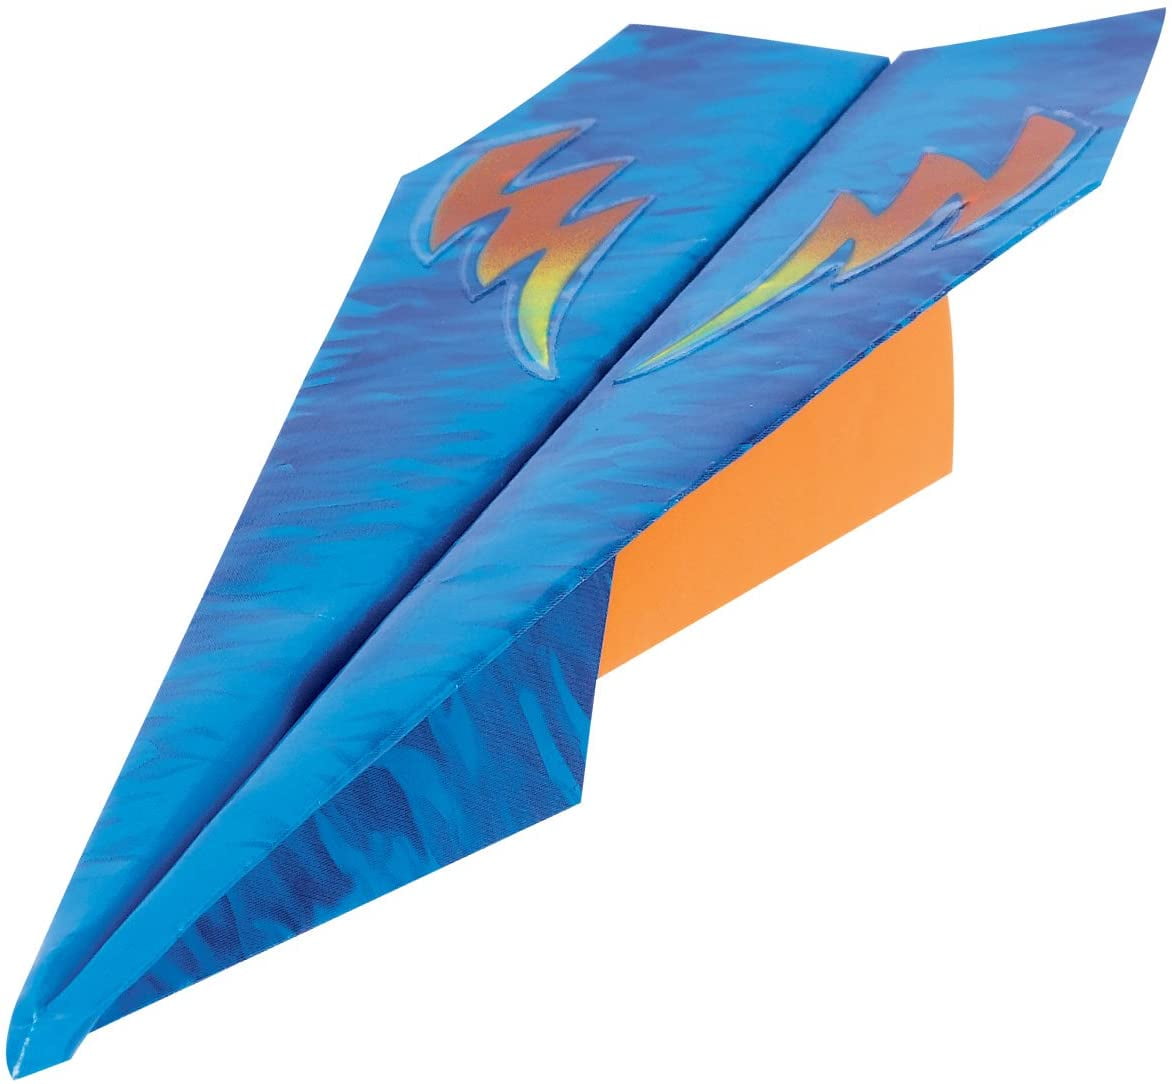 Supercool Paper Airplanes Kit - A2Z Science & Learning Toy Store